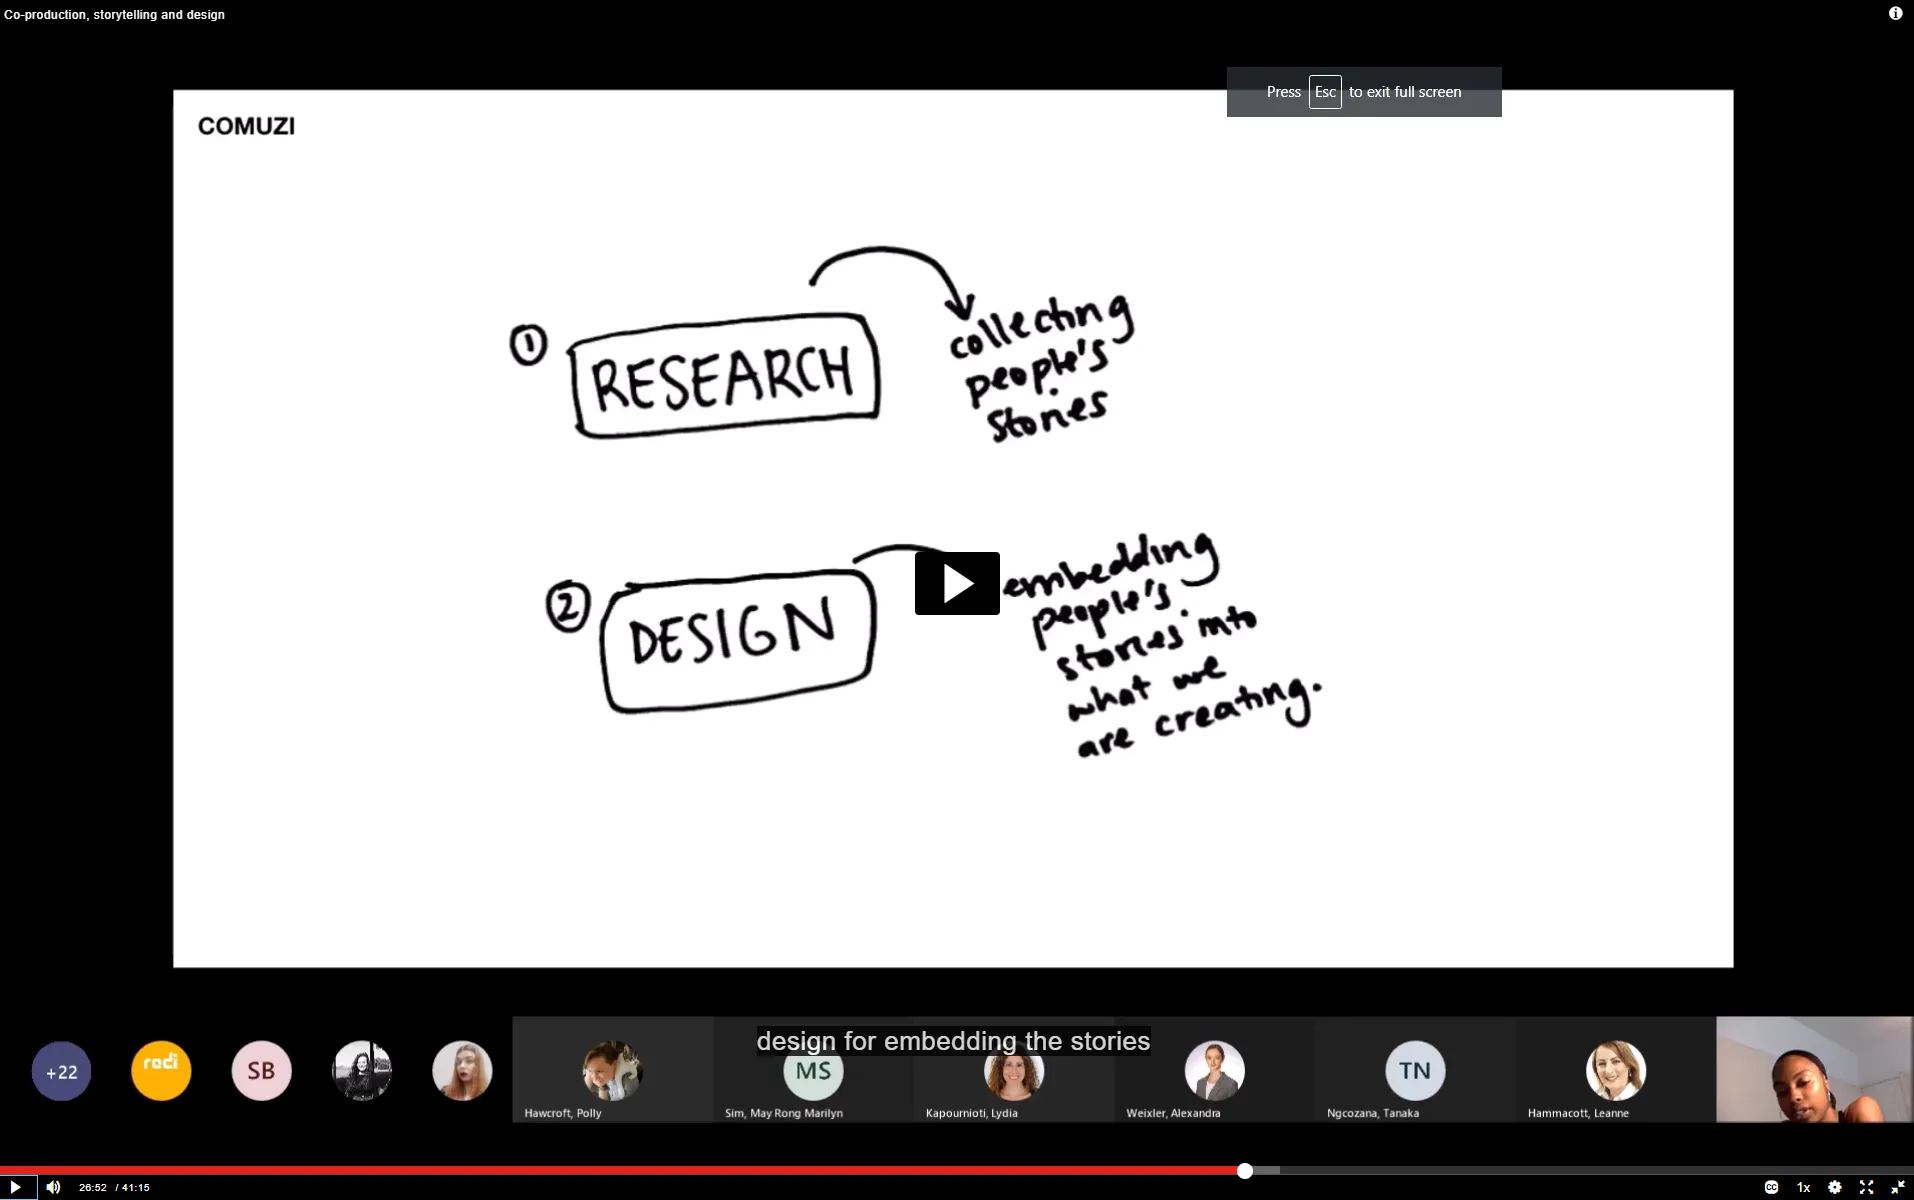 Still from 'Co-production, storytelling and design' masterclass